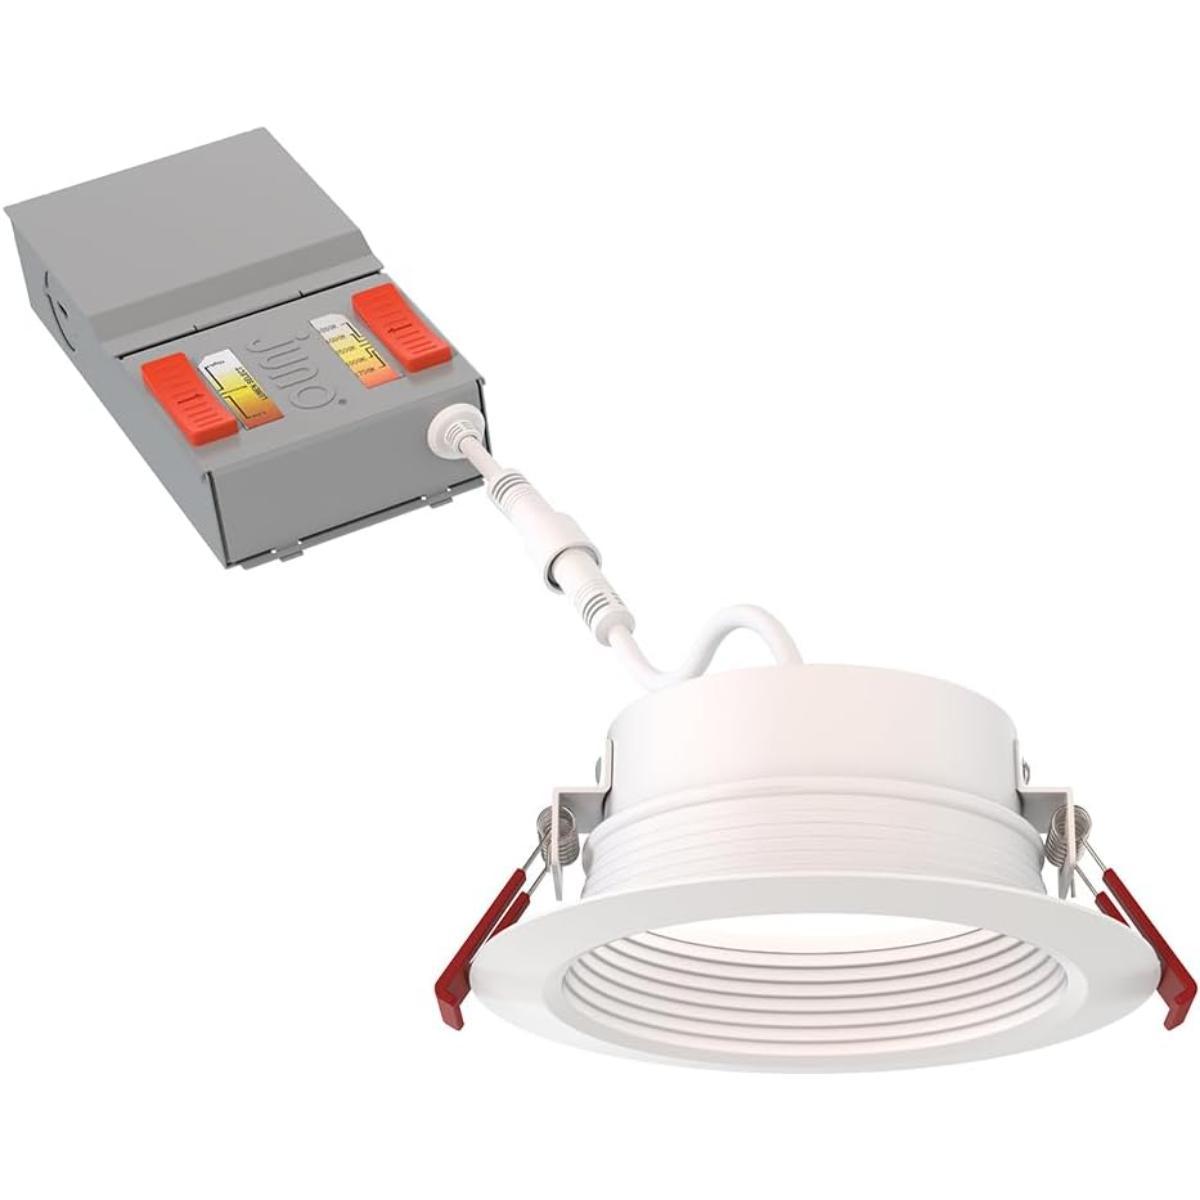 4 inch Wafer Canless LED Recessed Light, 14.5 Watt, 1100 Lumens, Selectable CCT, 2700K to 5000K, Baffle Trim - Bees Lighting